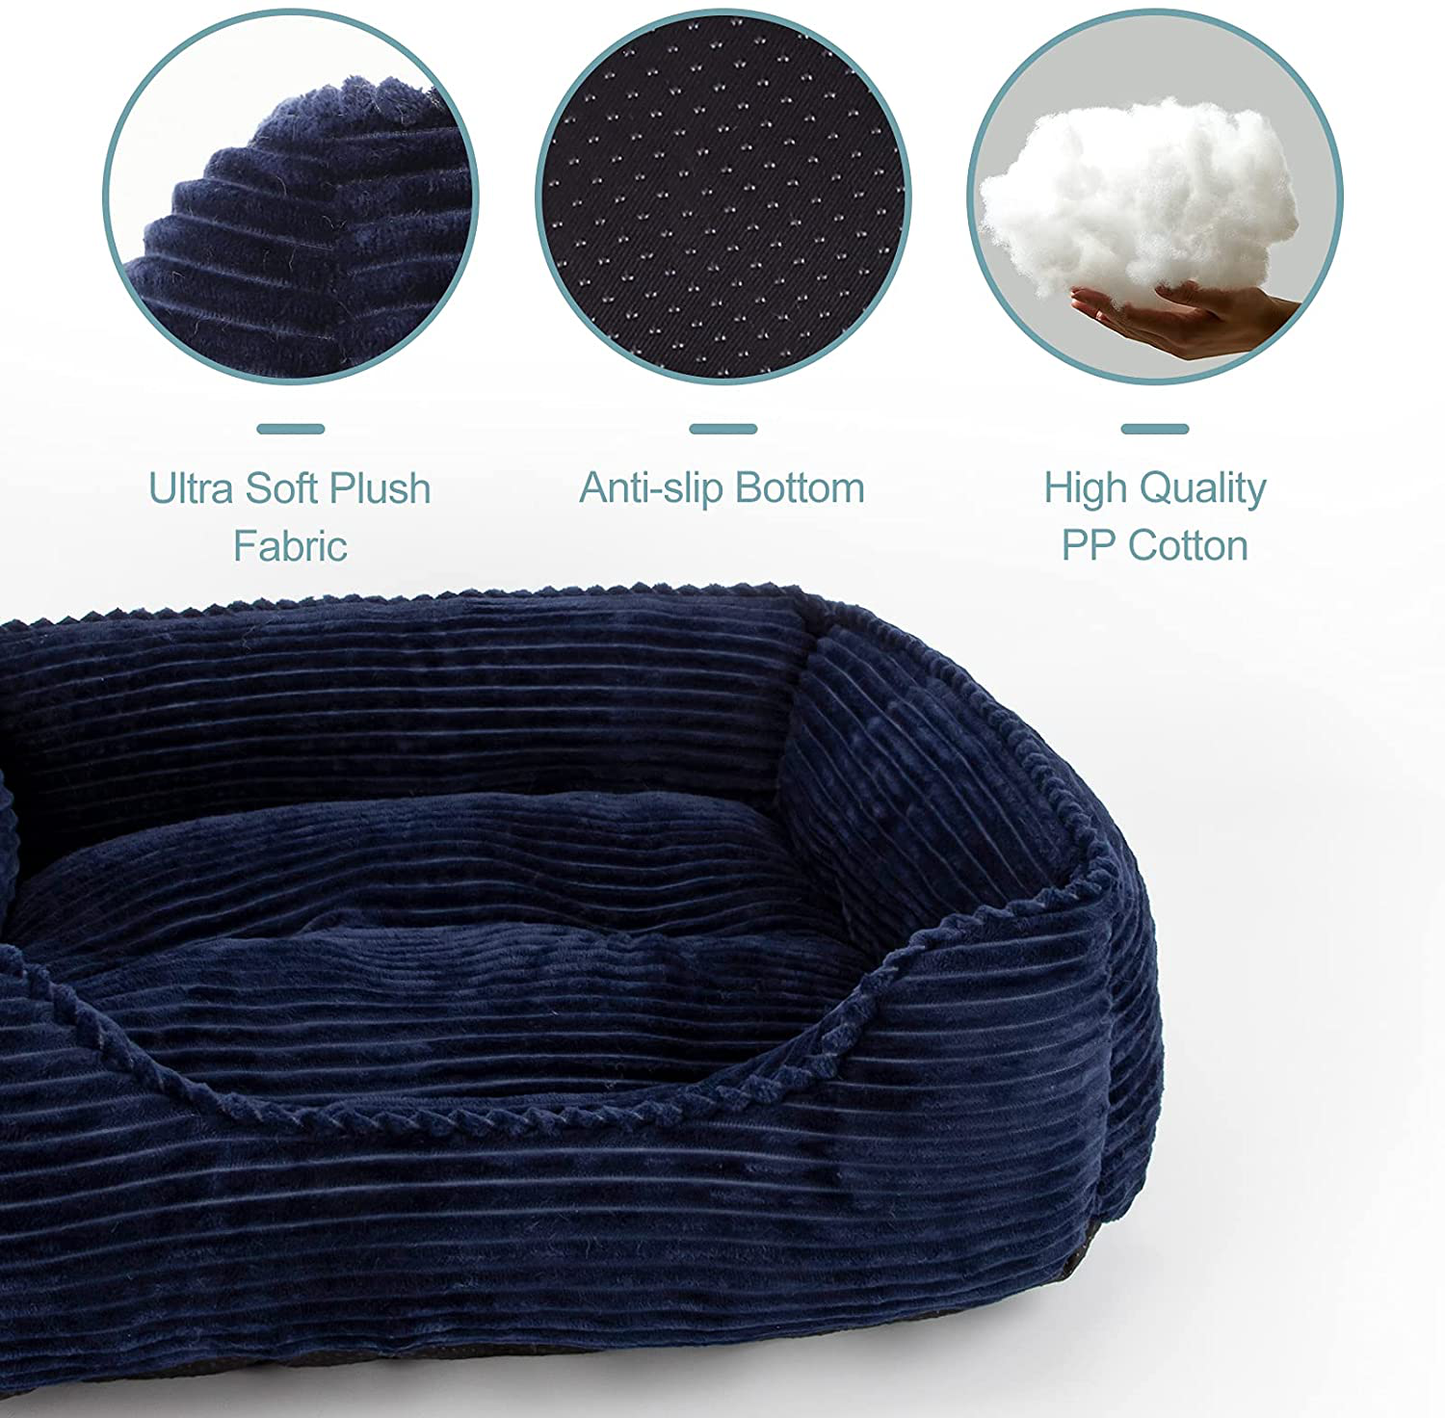 INVENHO Dog Beds for Small Medium Large Dogs Rectangle Washable Sleeping Puppy Bed Non-Slip Bottom Soft Orthopedic Pet Bed Calming Cat Beds for Indoor Cats 25 Inches (Navy Blue)